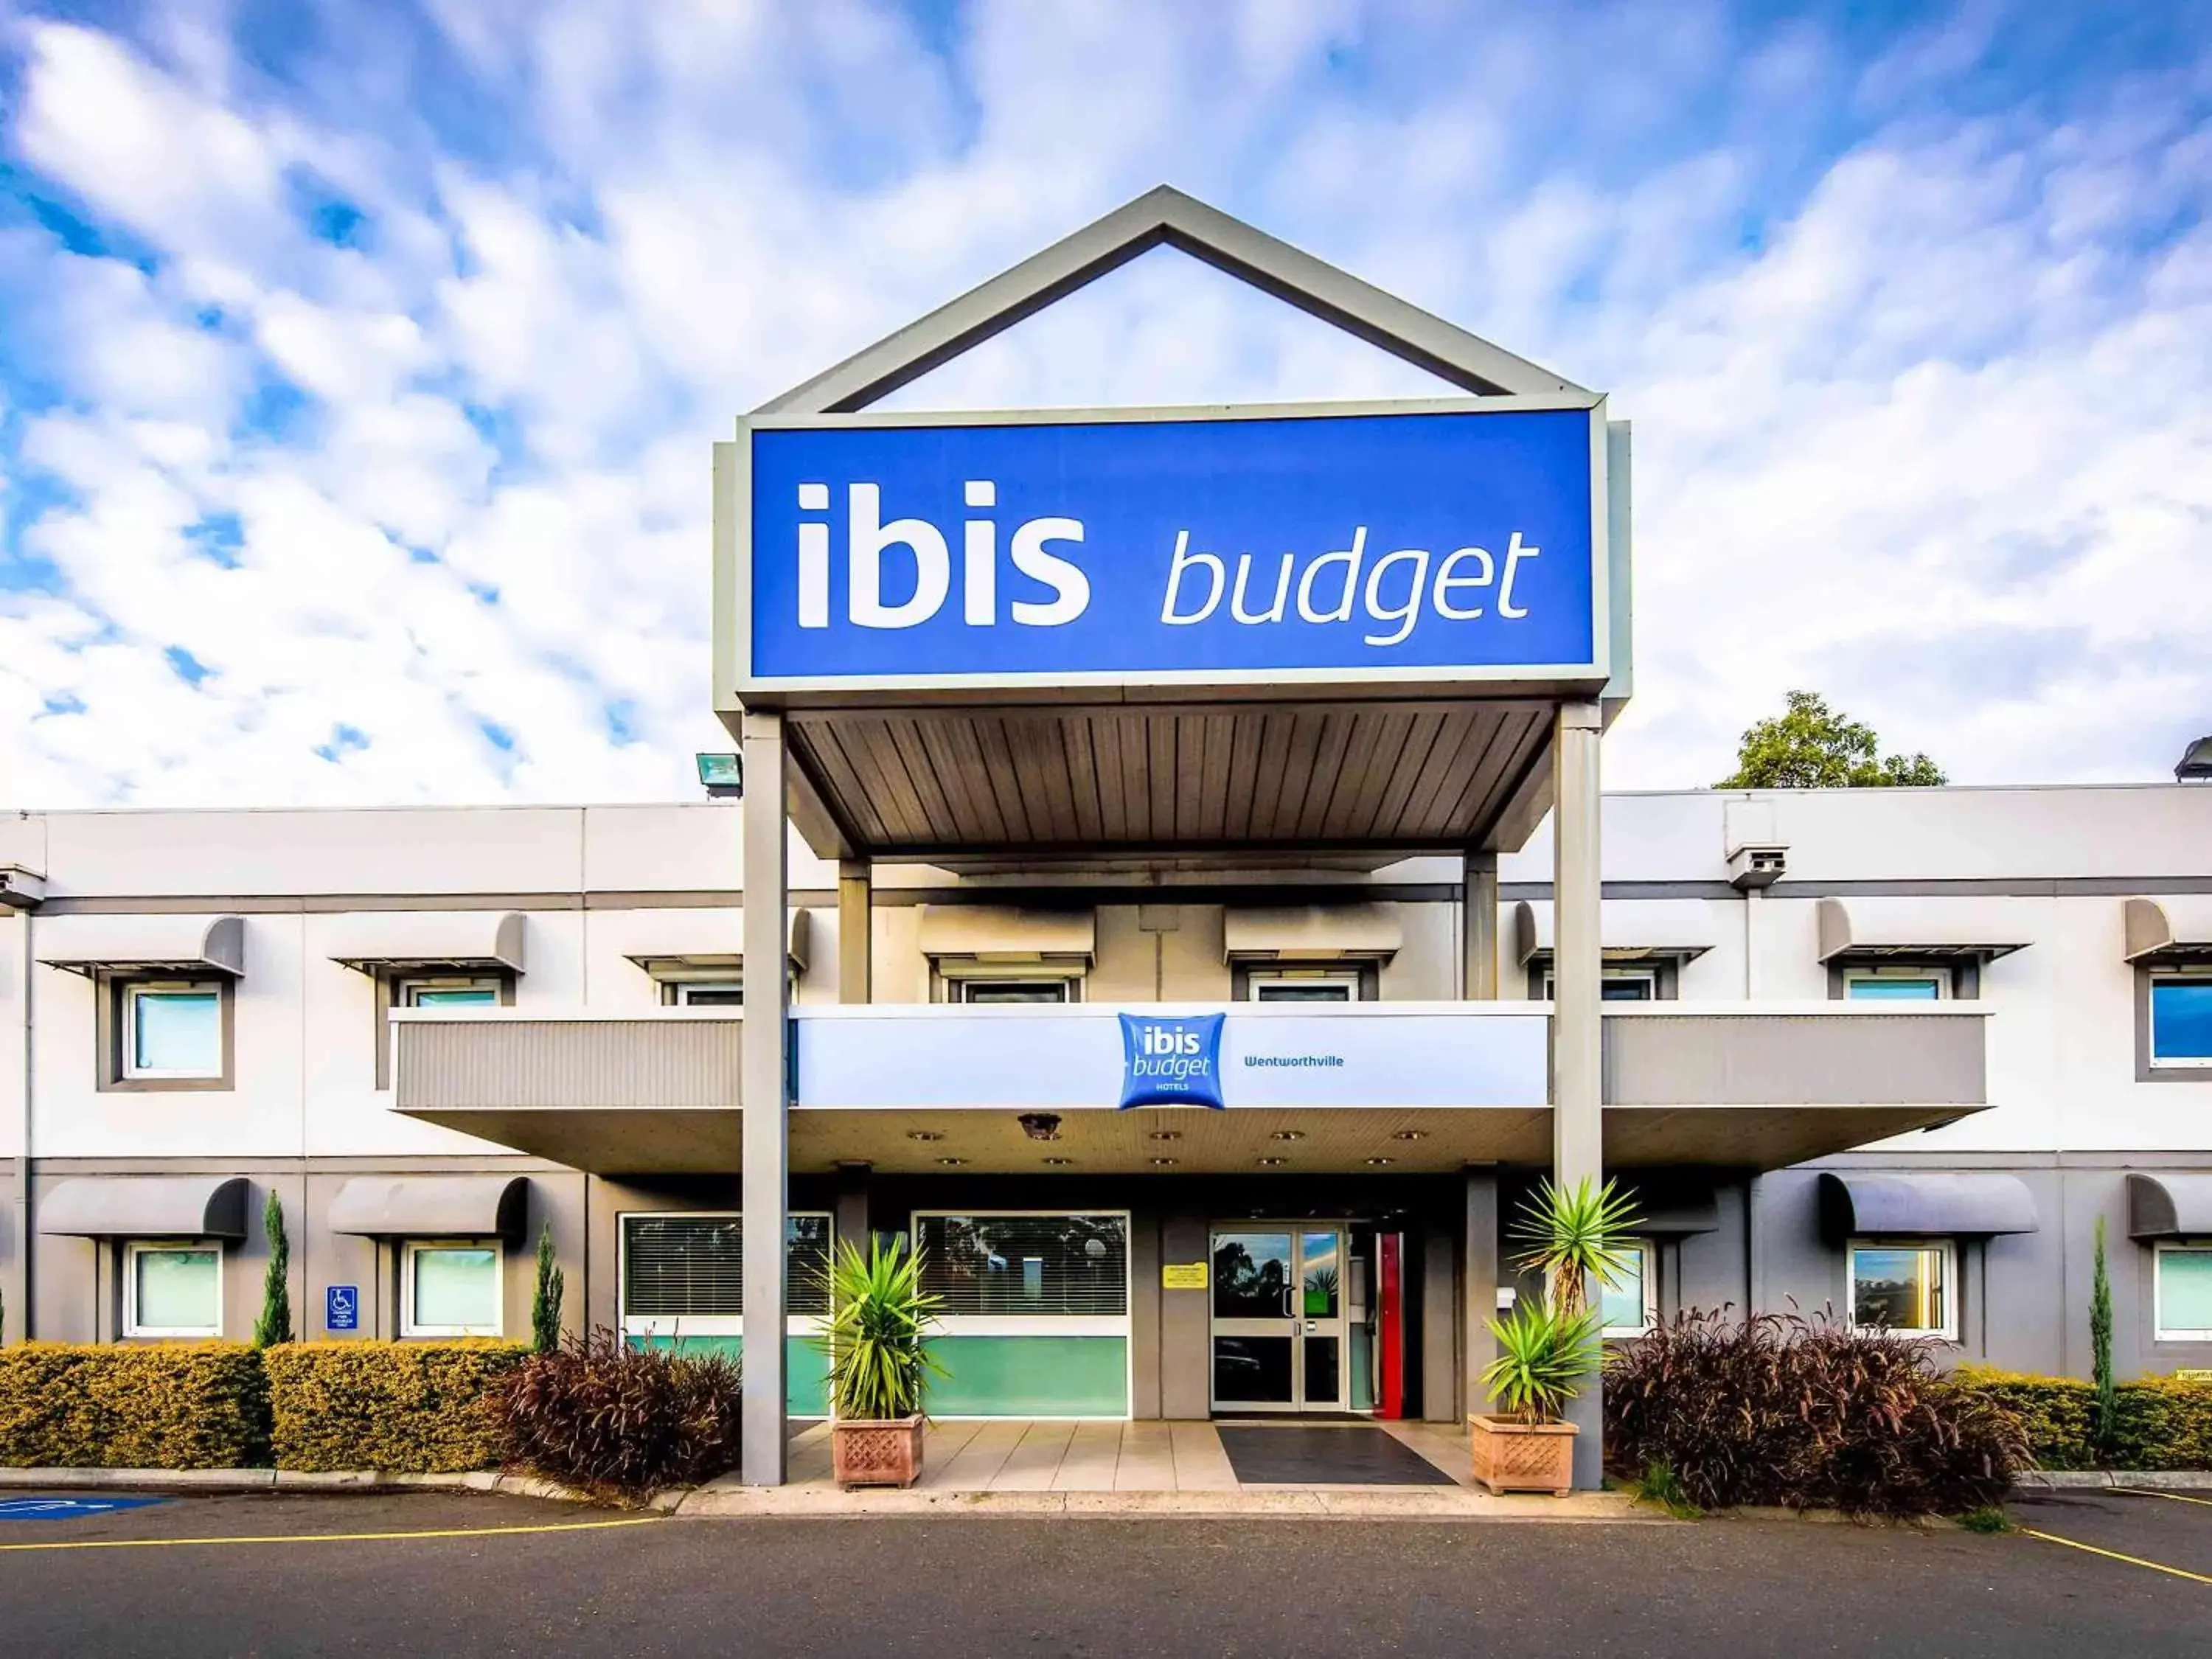 Property building in ibis Budget Wentworthville